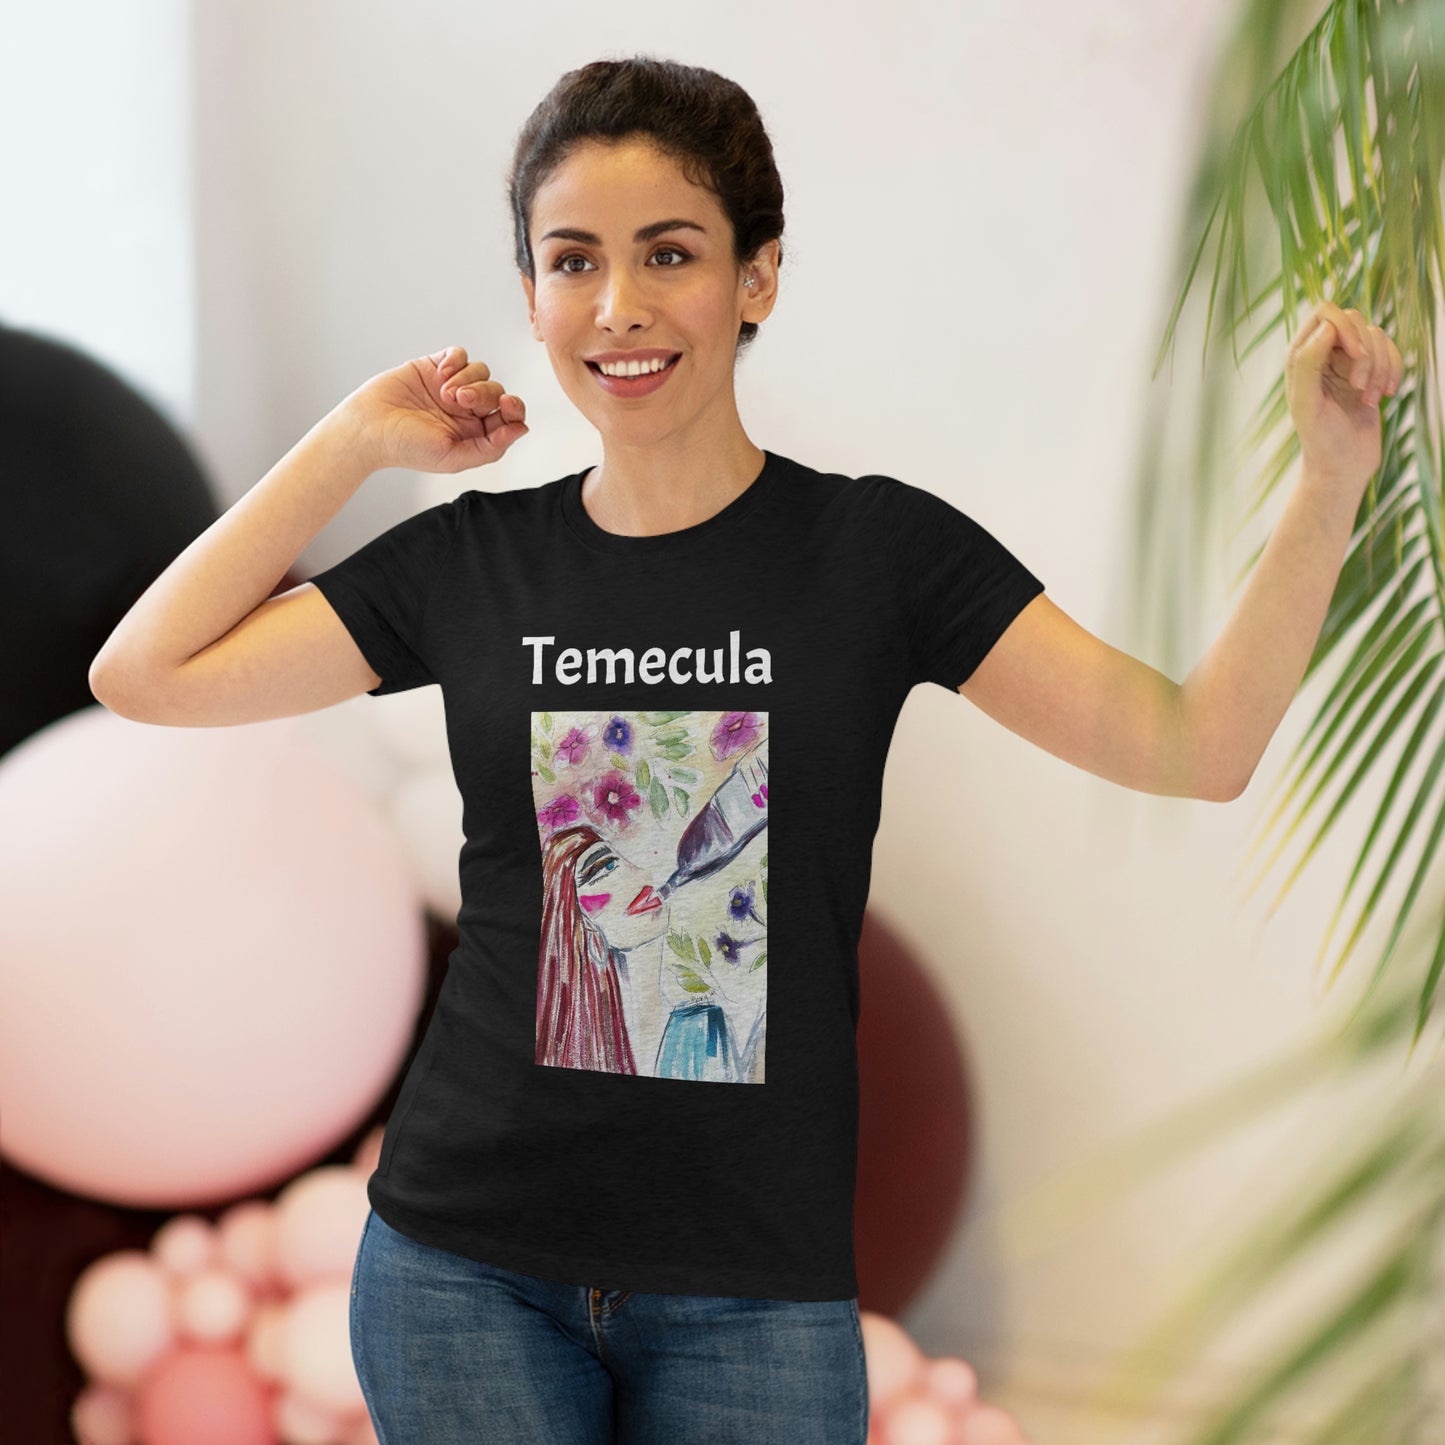 Temecula Women's fitted Triblend Tee Temecula tee shirt souvenir featuring "That kind of Day" painting